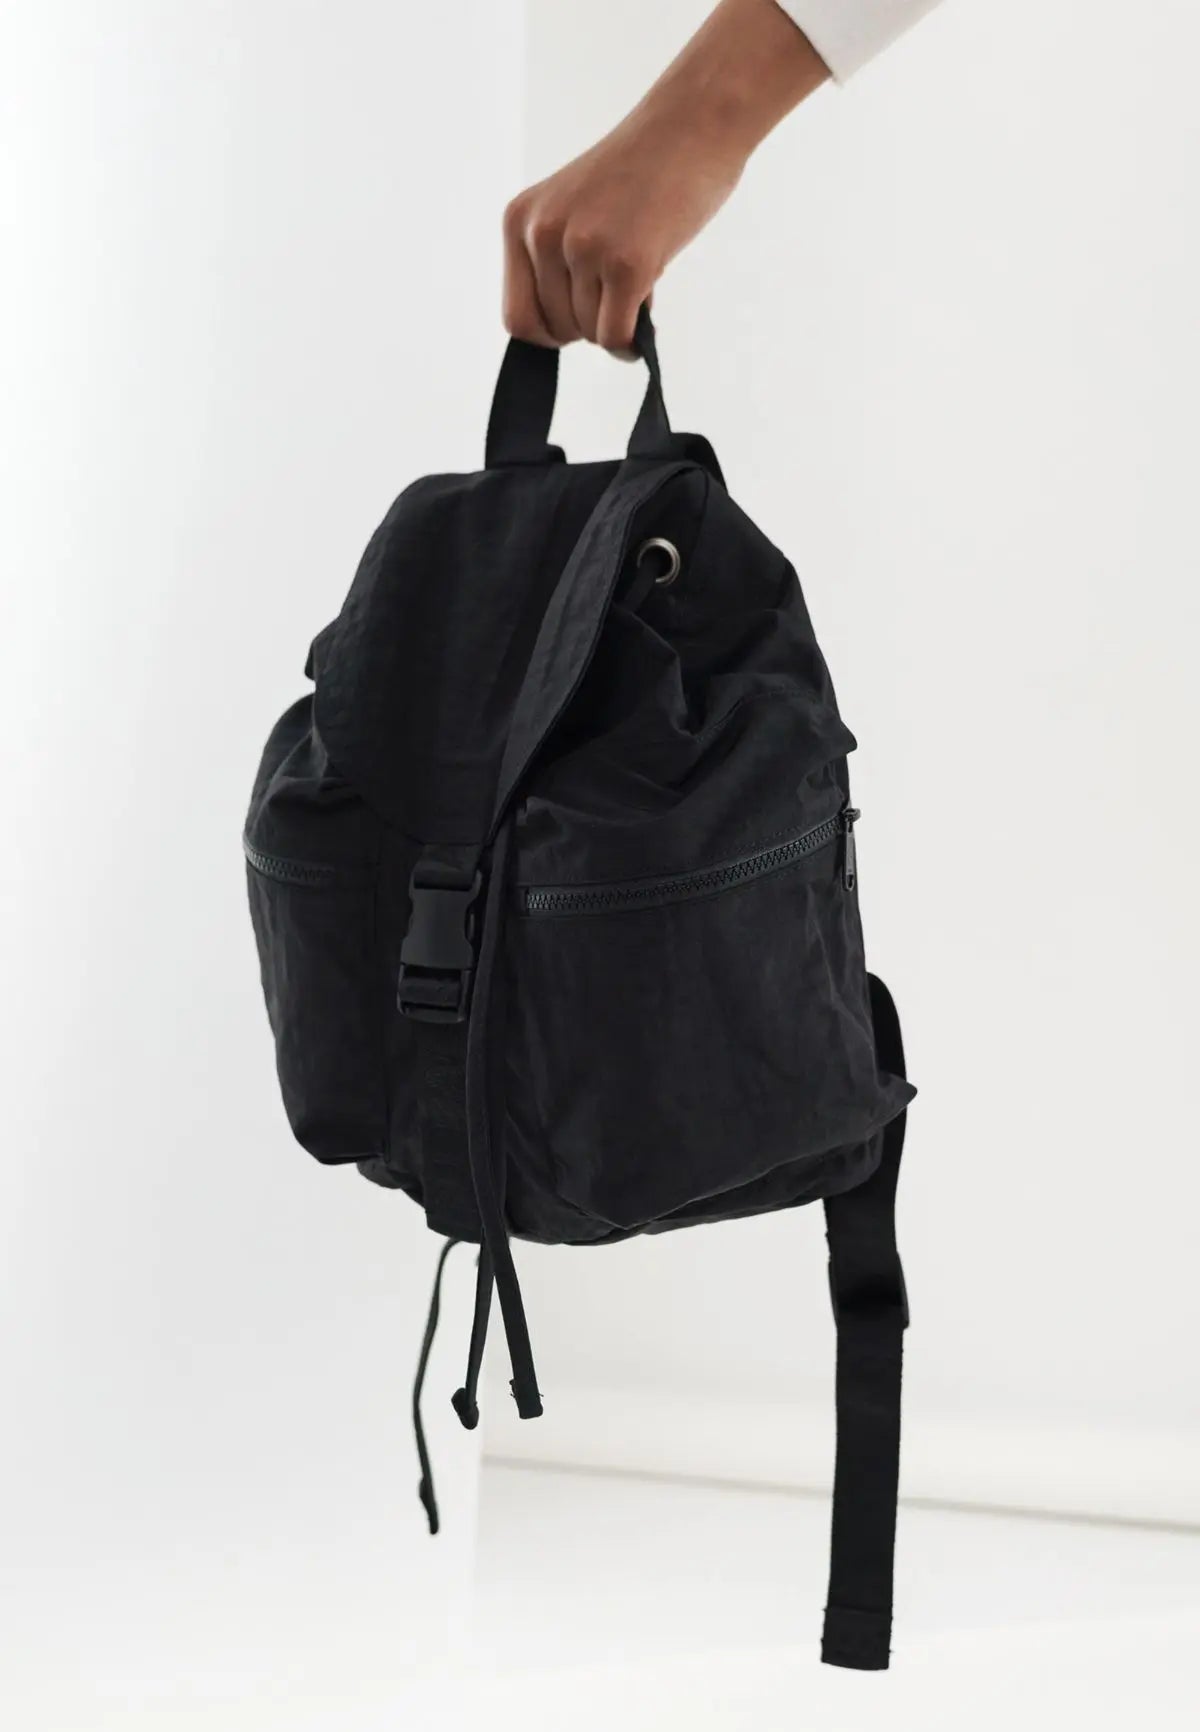 SMALL SPORT BACKPACK